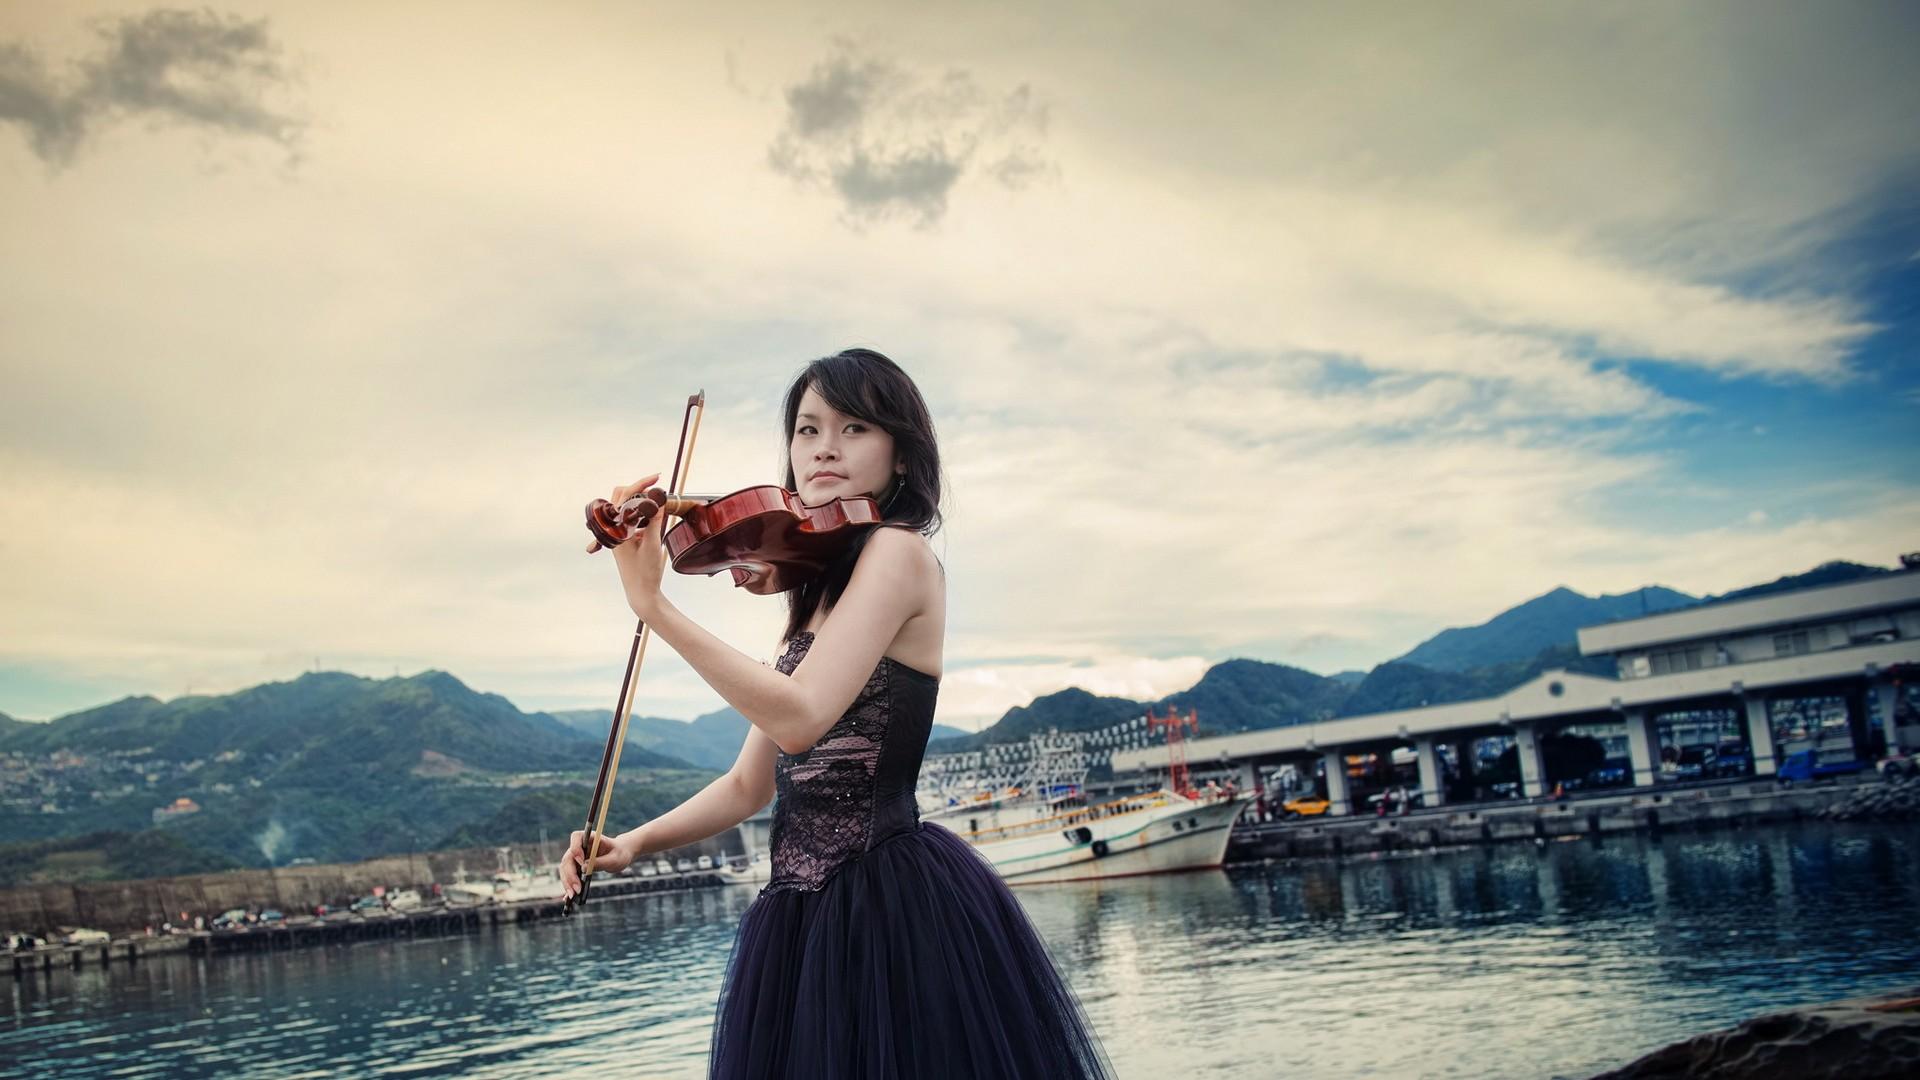 Girl with a violin on a background of the ship wallpaper